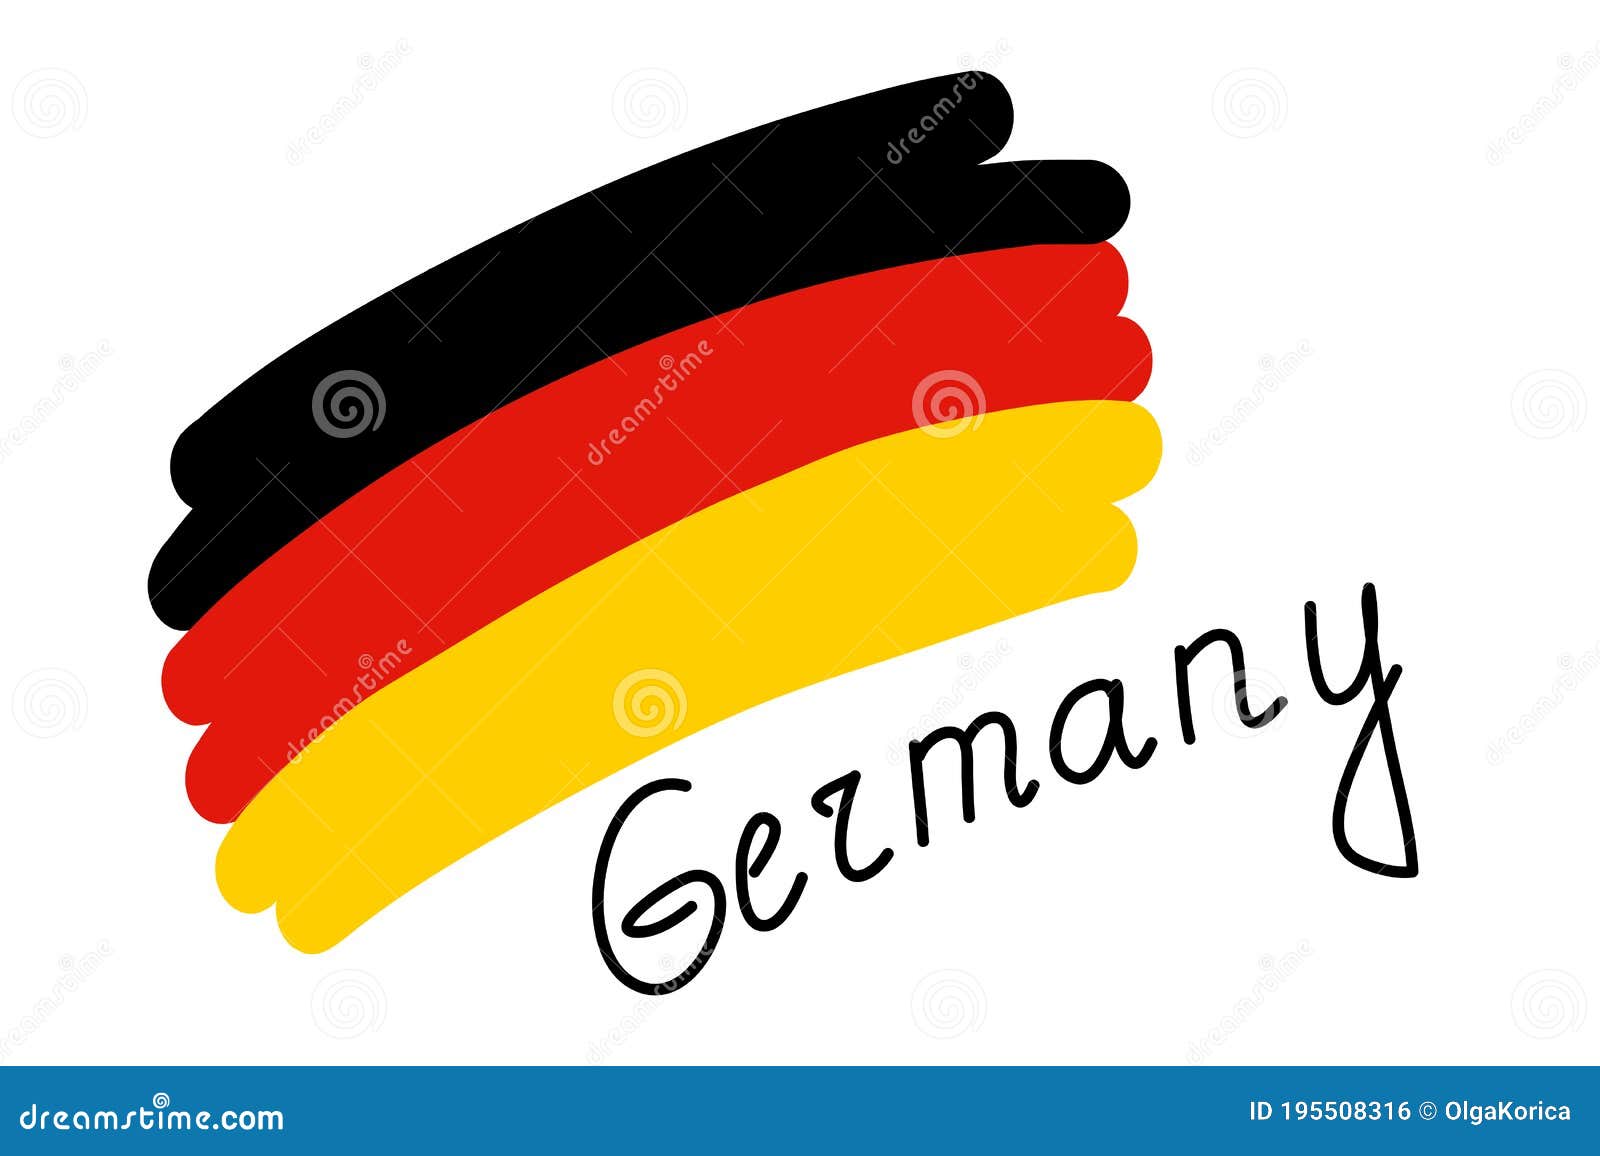 plads Natur jeg er enig Flag of Germany, Simple Stylized Vector Illustration with Freehand Text.  Black Red Yellow German Flag, Hand Drawn Country Name Stock Vector -  Illustration of idea, design: 195508316